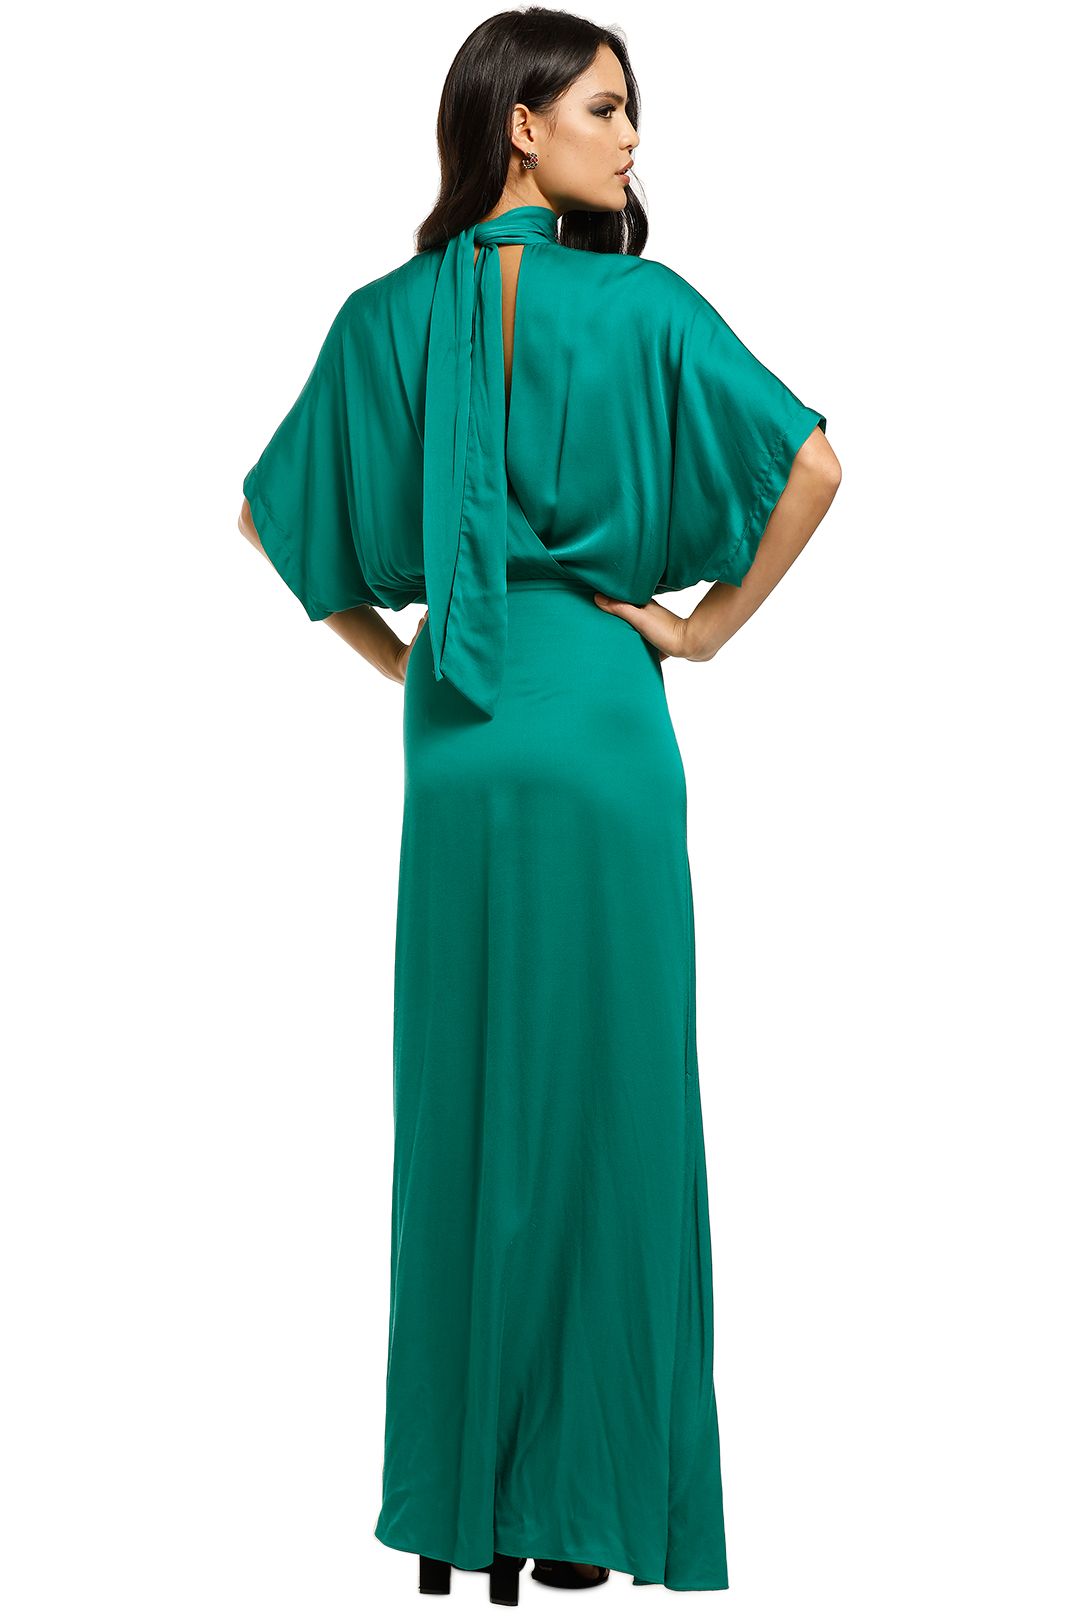 Bliss Gown in Jade Green by Ginger and Smart for Hire | GlamCorner